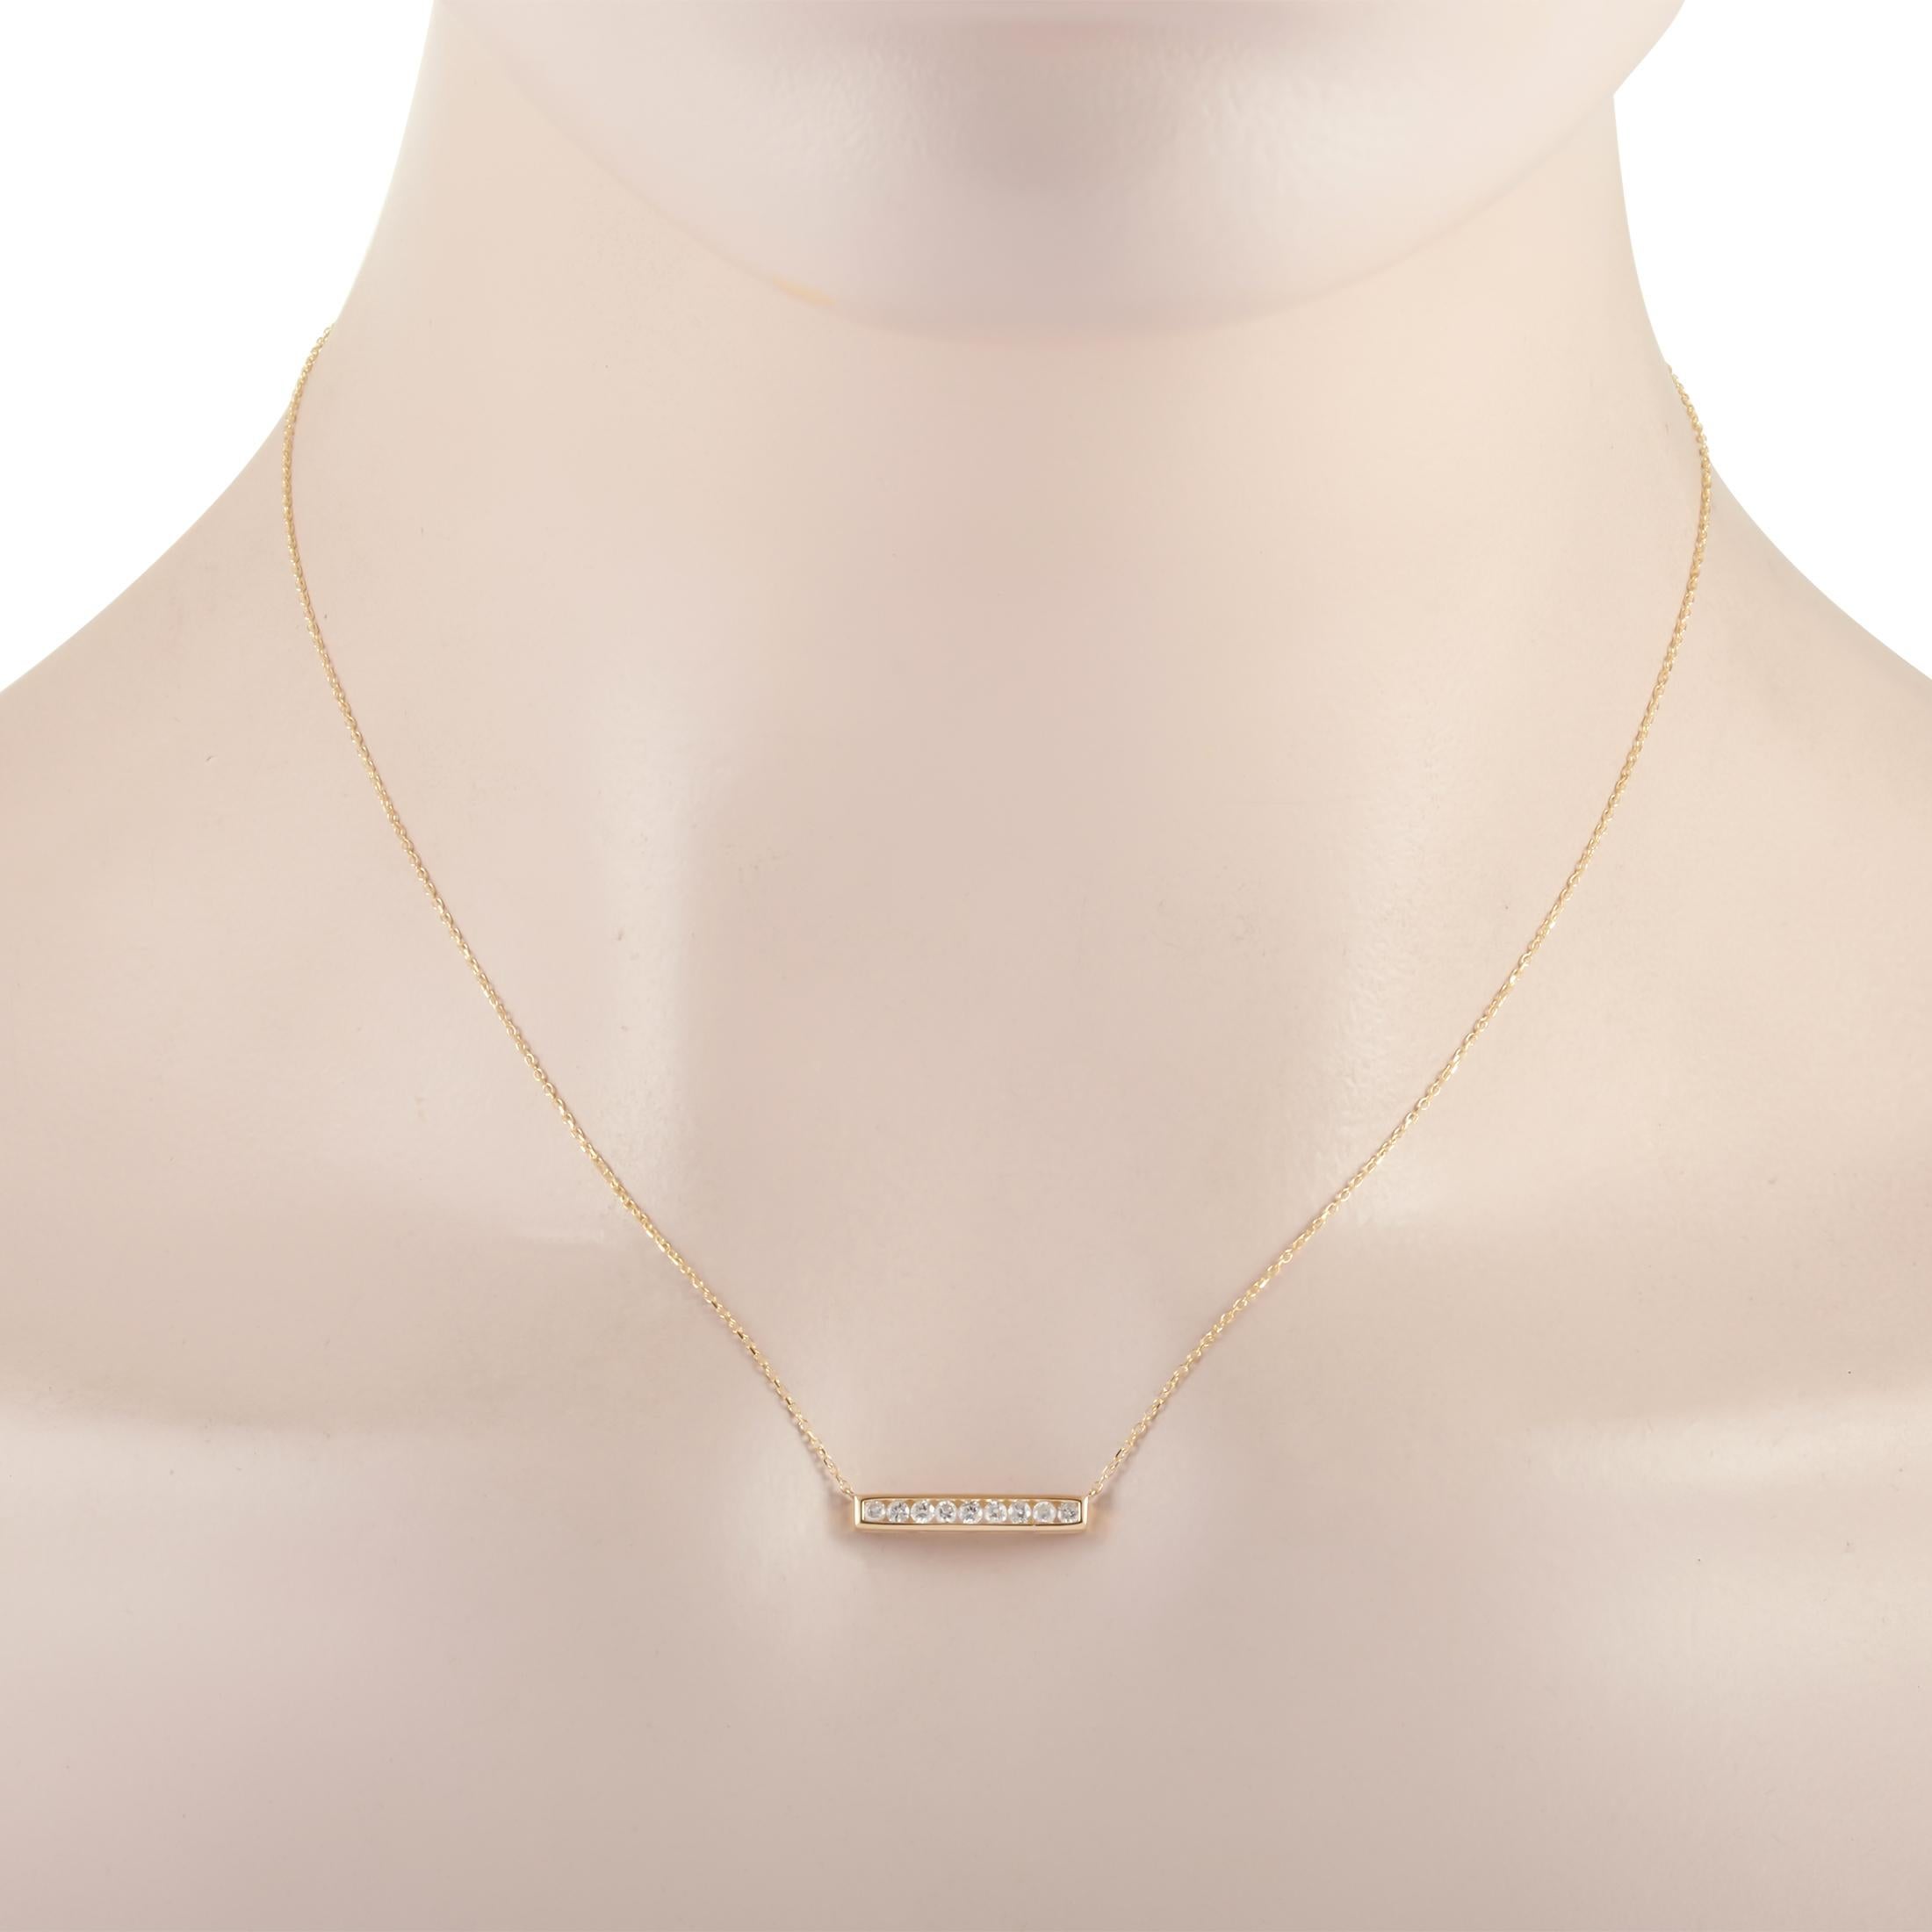 This LB Exclusive necklace is made of 14K yellow gold and embellished with diamonds that amount to 0.25 carats. The necklace weighs 1.8 grams and boasts a 15” chain and a pendant that measures 0.1” in length and 0.75” in width.
 
 Offered in brand